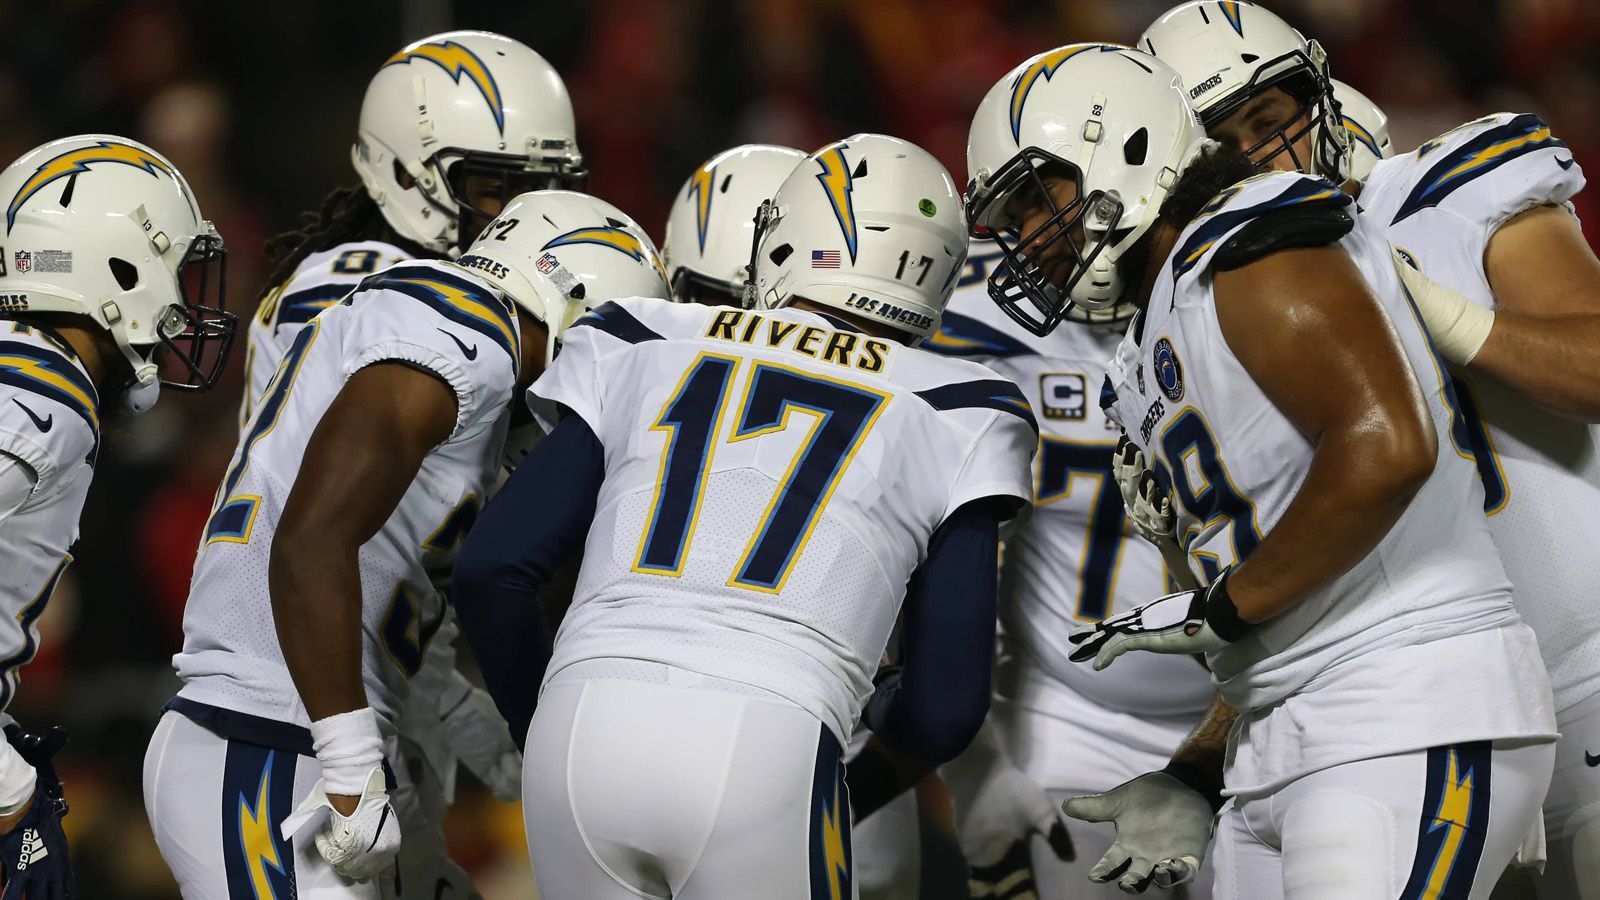 
                <strong>Los Angeles Chargers</strong><br>
                Team Captains: Los Angeles Chargers, Philip Rivers (QB), Brandon Mebane (DT), Thomas Davis (LB), Mike Pouncey (C), Melvin Ingram (DE)
              